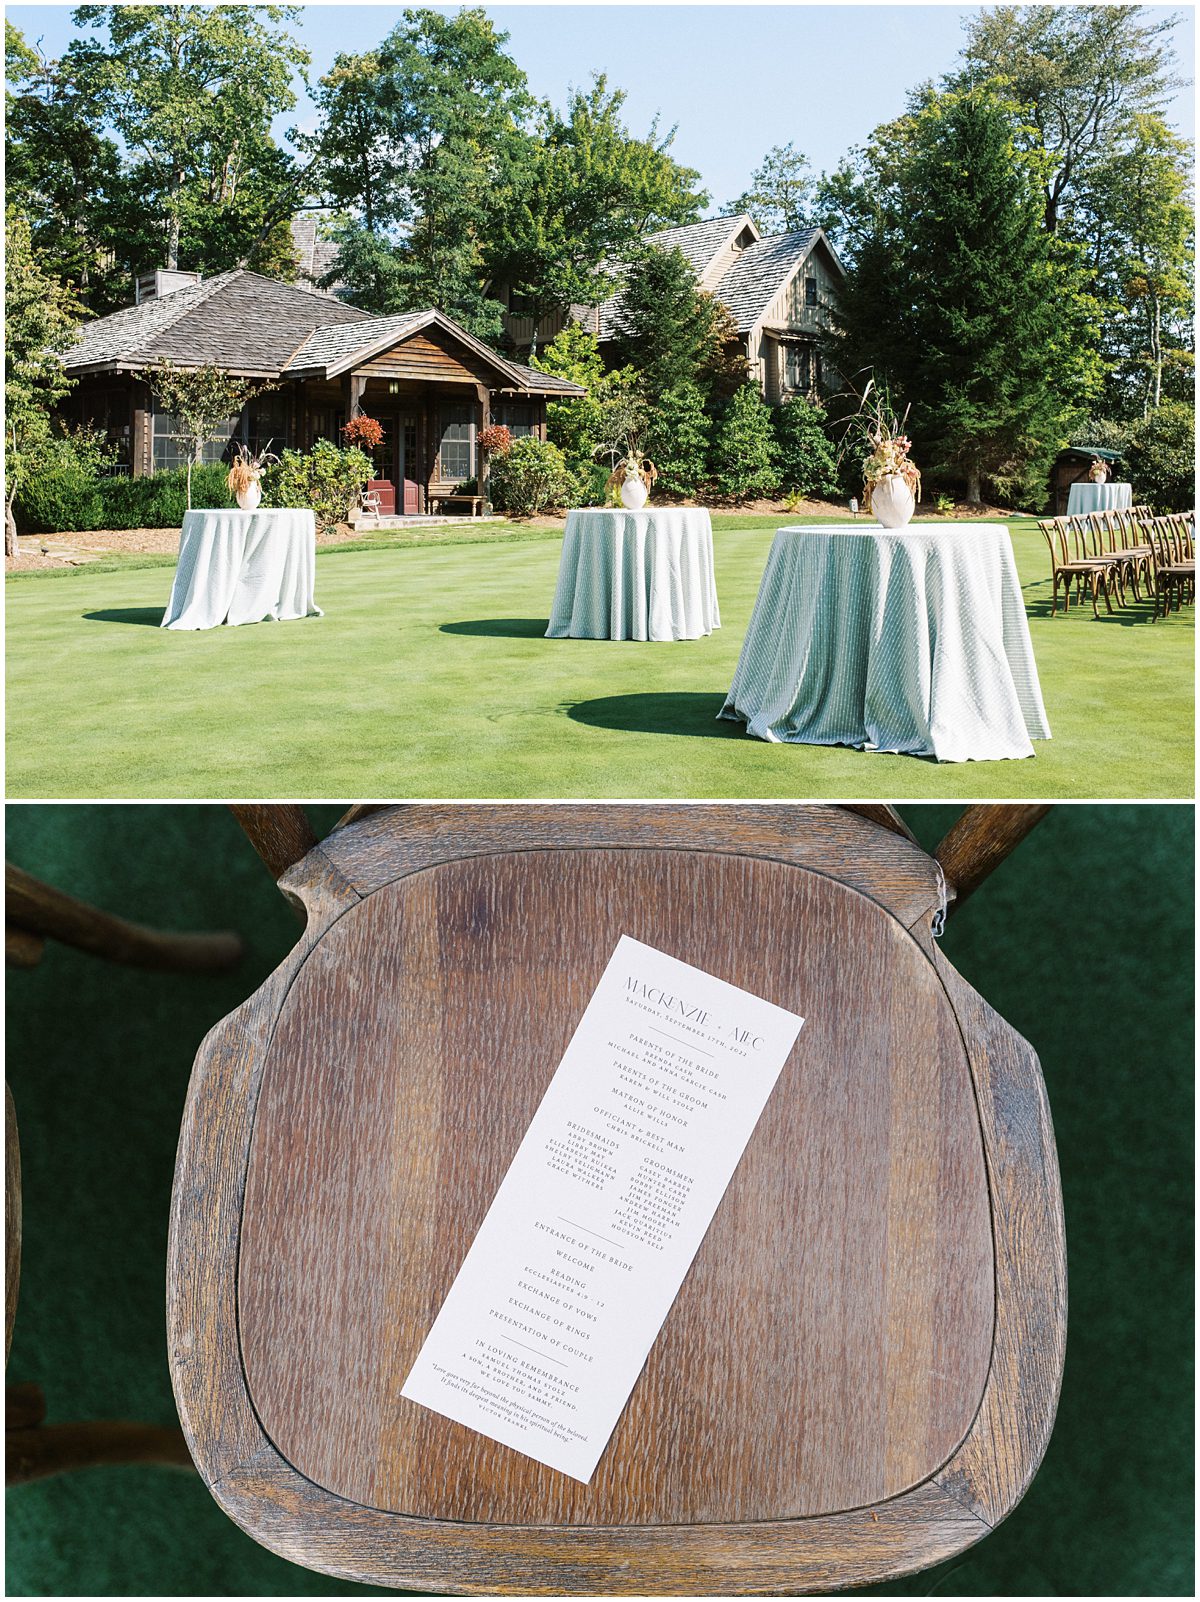 Wedding ceremony set up on the lawn of Mountaintop Golf and Lake Club with wooden chairs, tables, textured linens, and flowers in ceramic vases